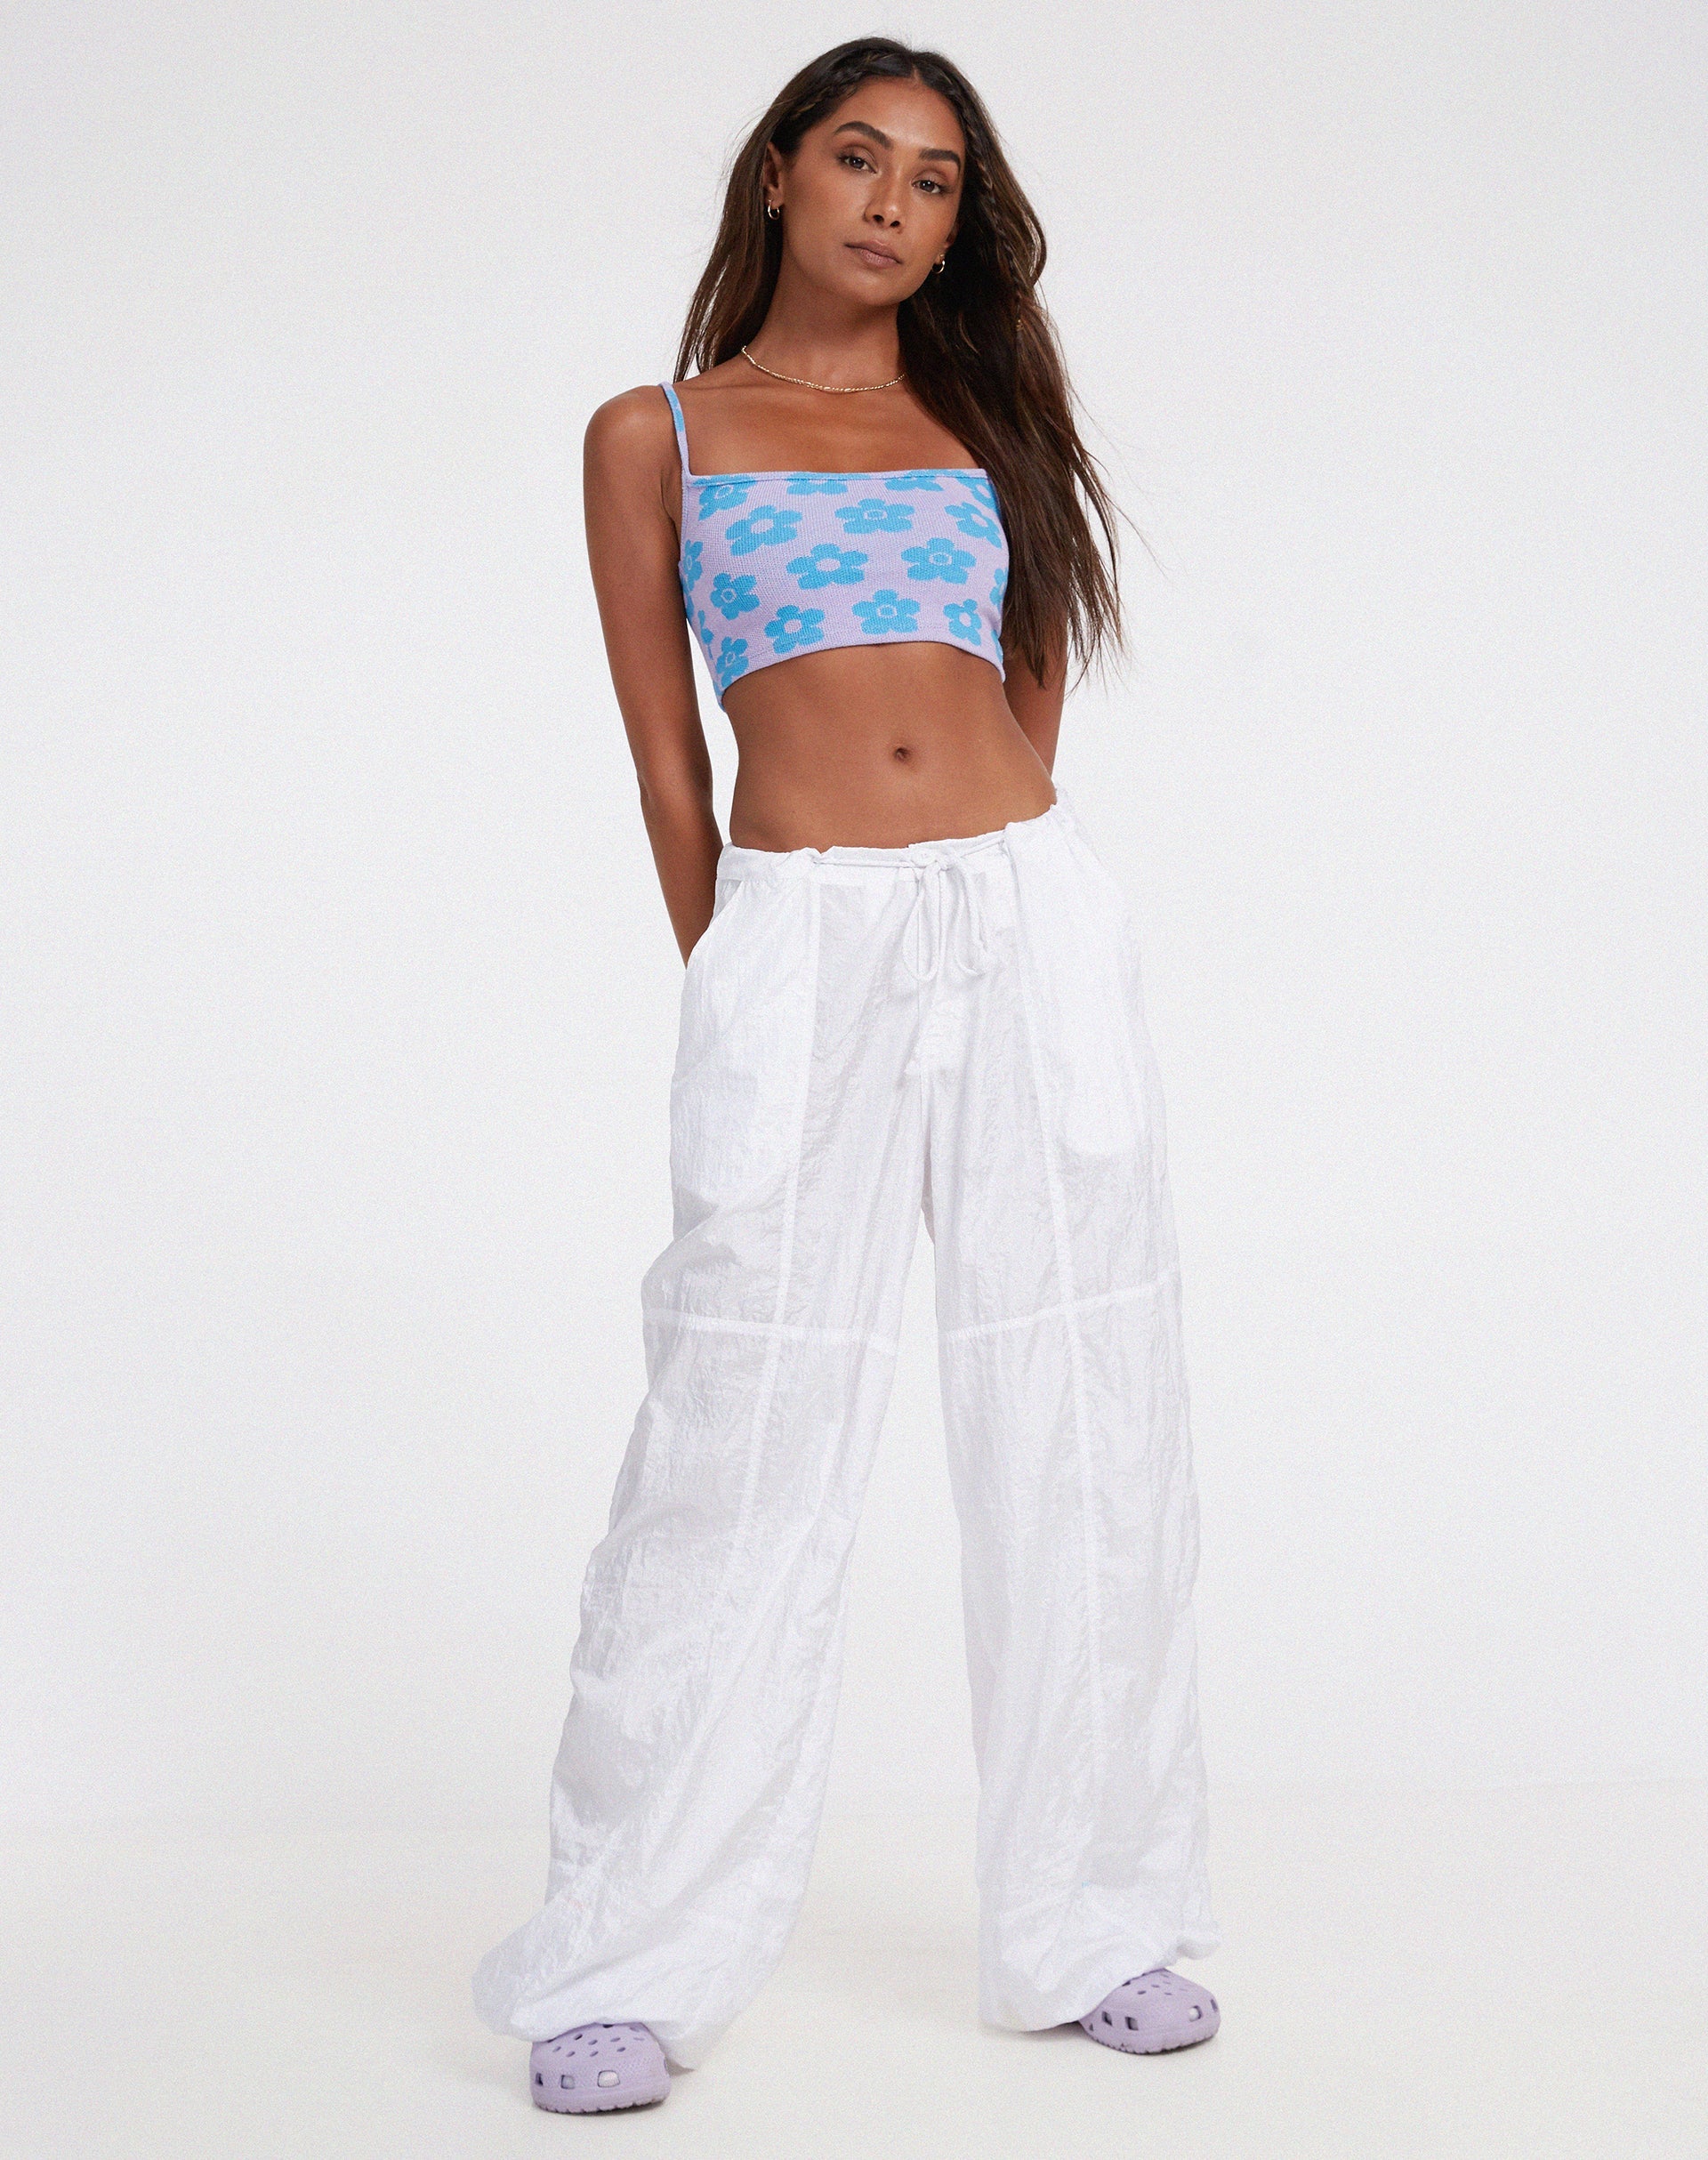 image of Tala Crop Top in Cute Floral Daisy Lilac and Blue